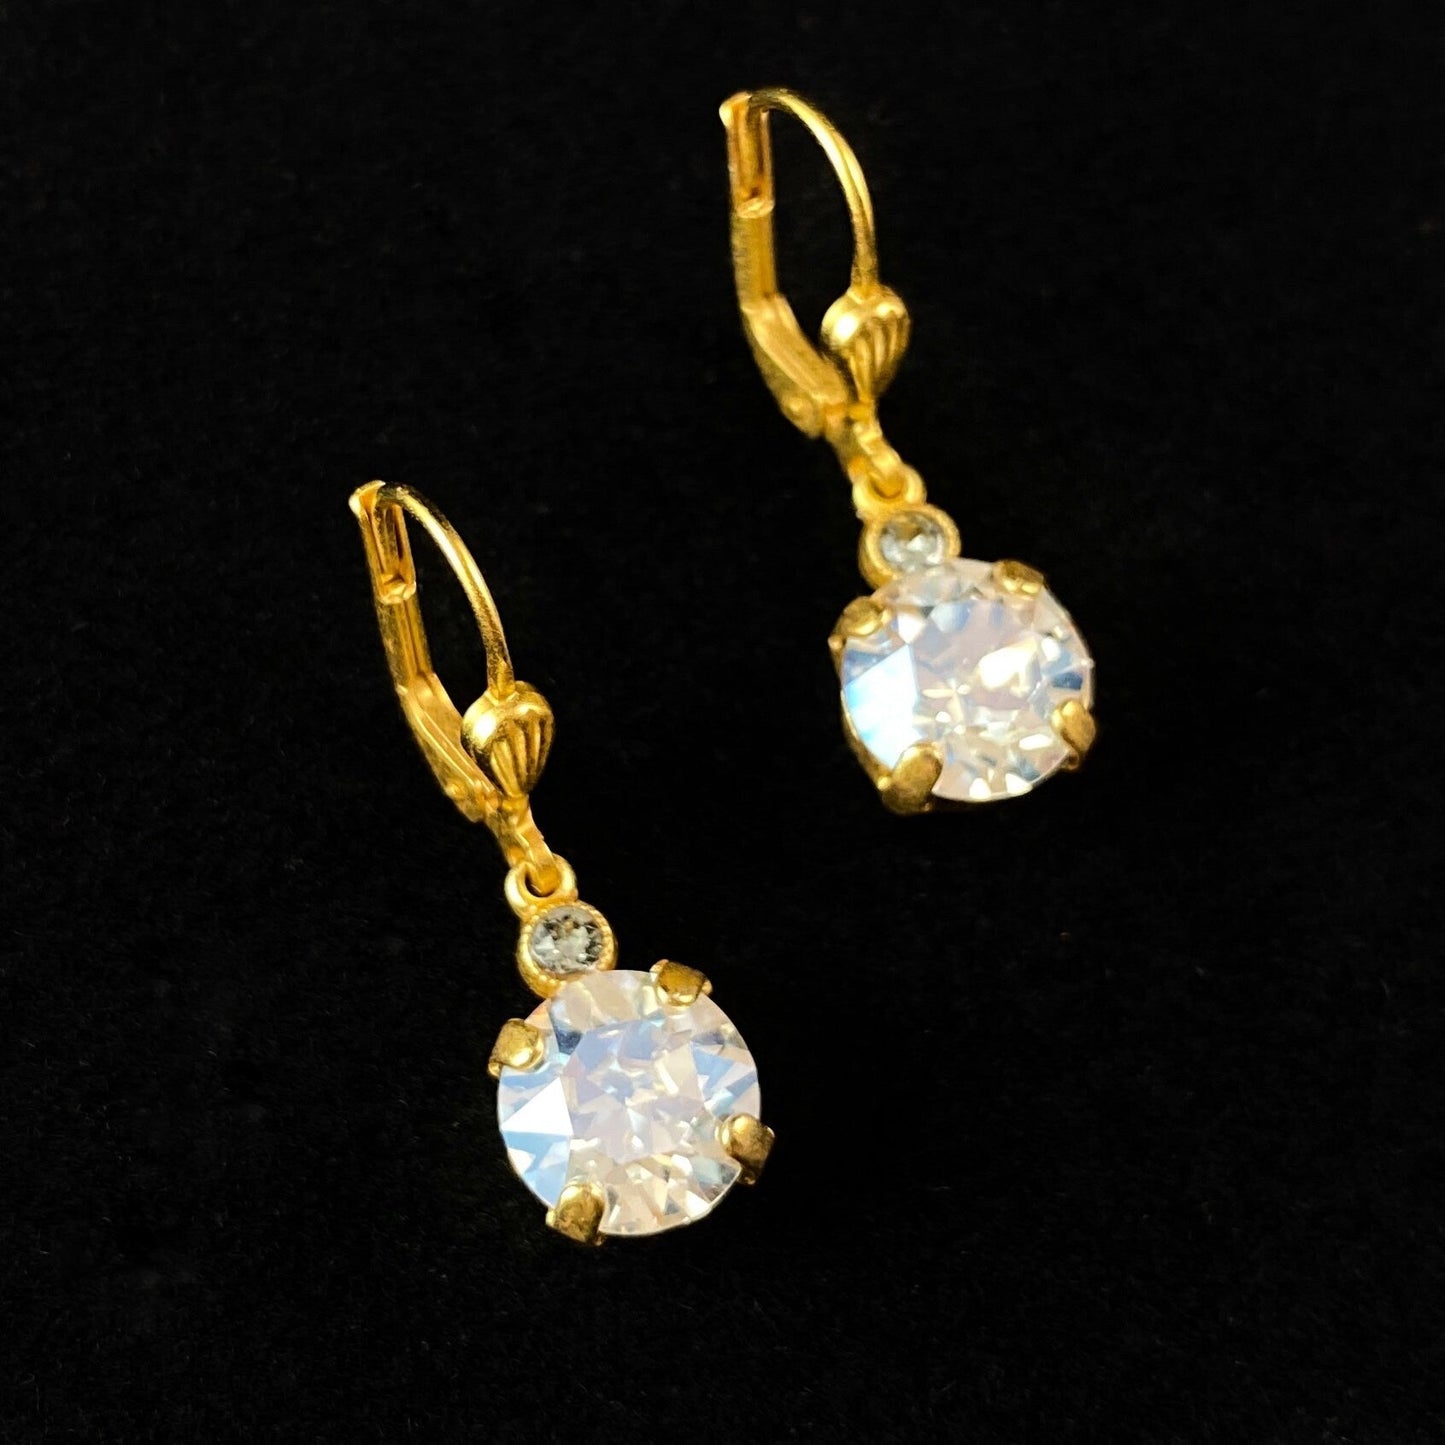 Round Clear Swarovski Crystal Drop Earrings with Tiny Crystal Detailing- La Vie Parisienne by Catherine Popesco